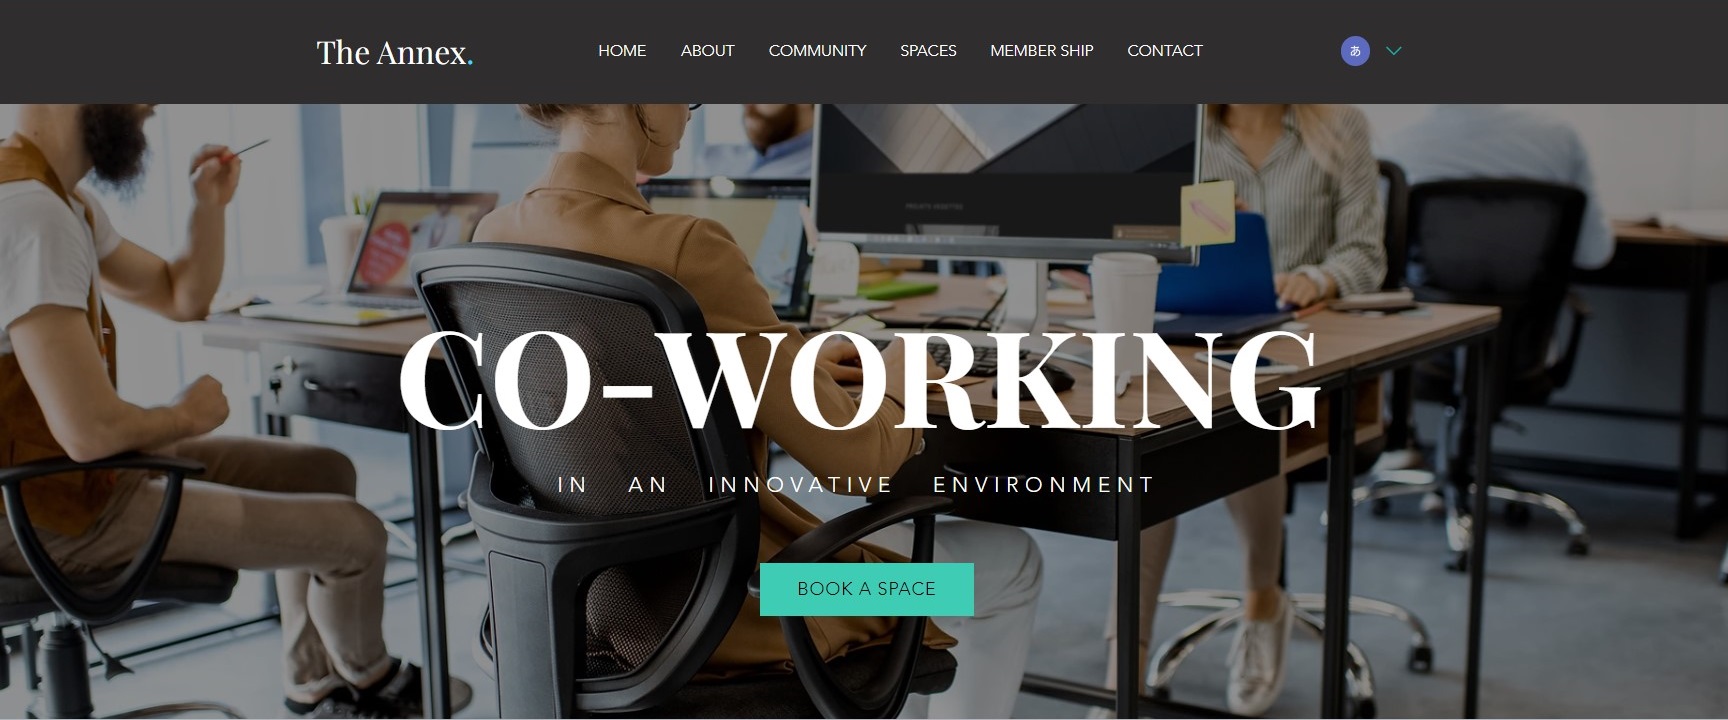 co-working-site